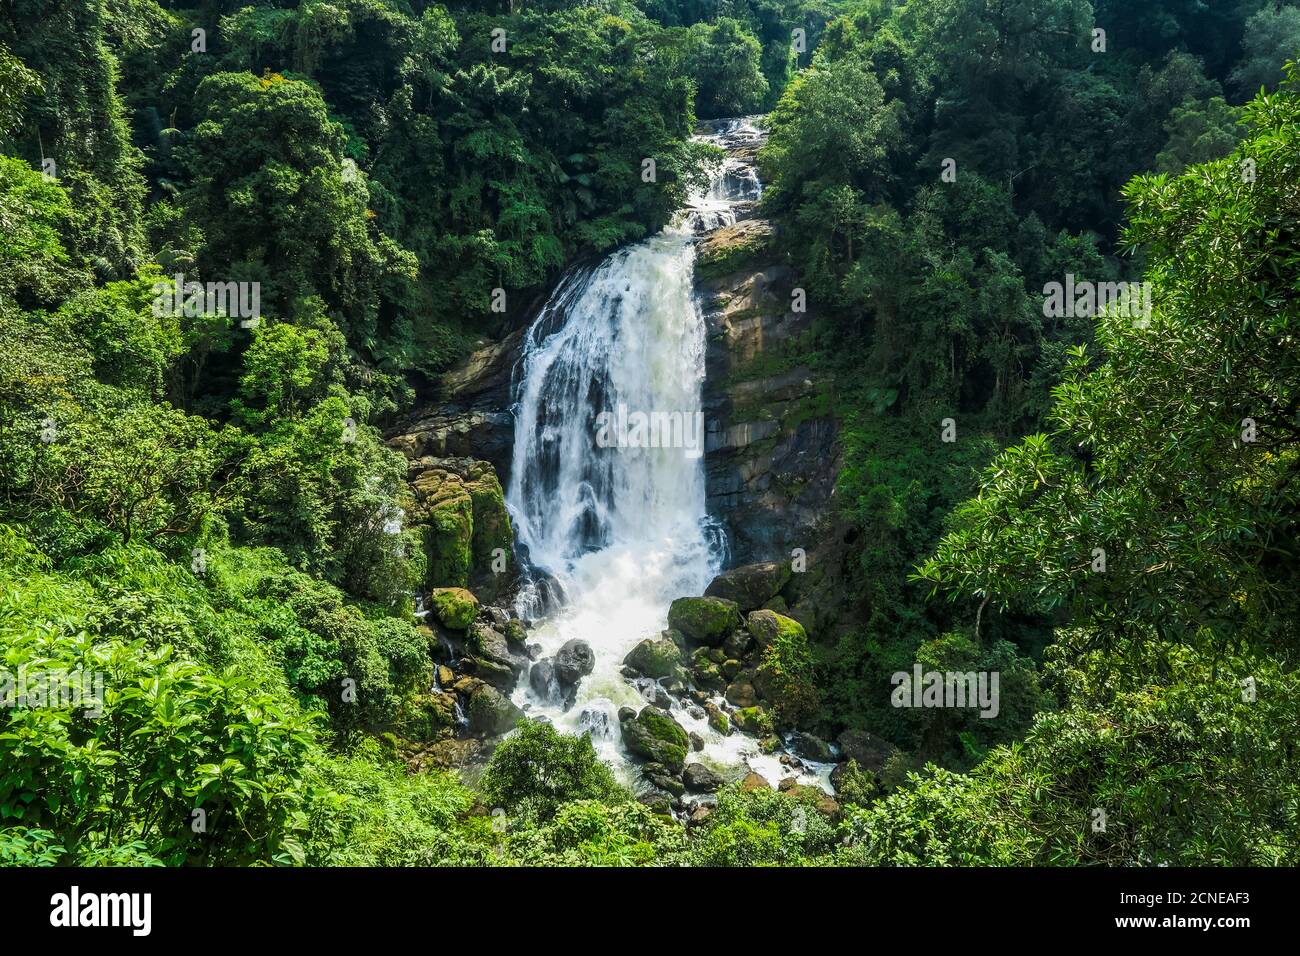 The 70m Valara Waterfall on the Deviyar River after Monsoon, a popular sight on the road to Munnar, Idukki district, Kerala, India, Asia Stock Photo